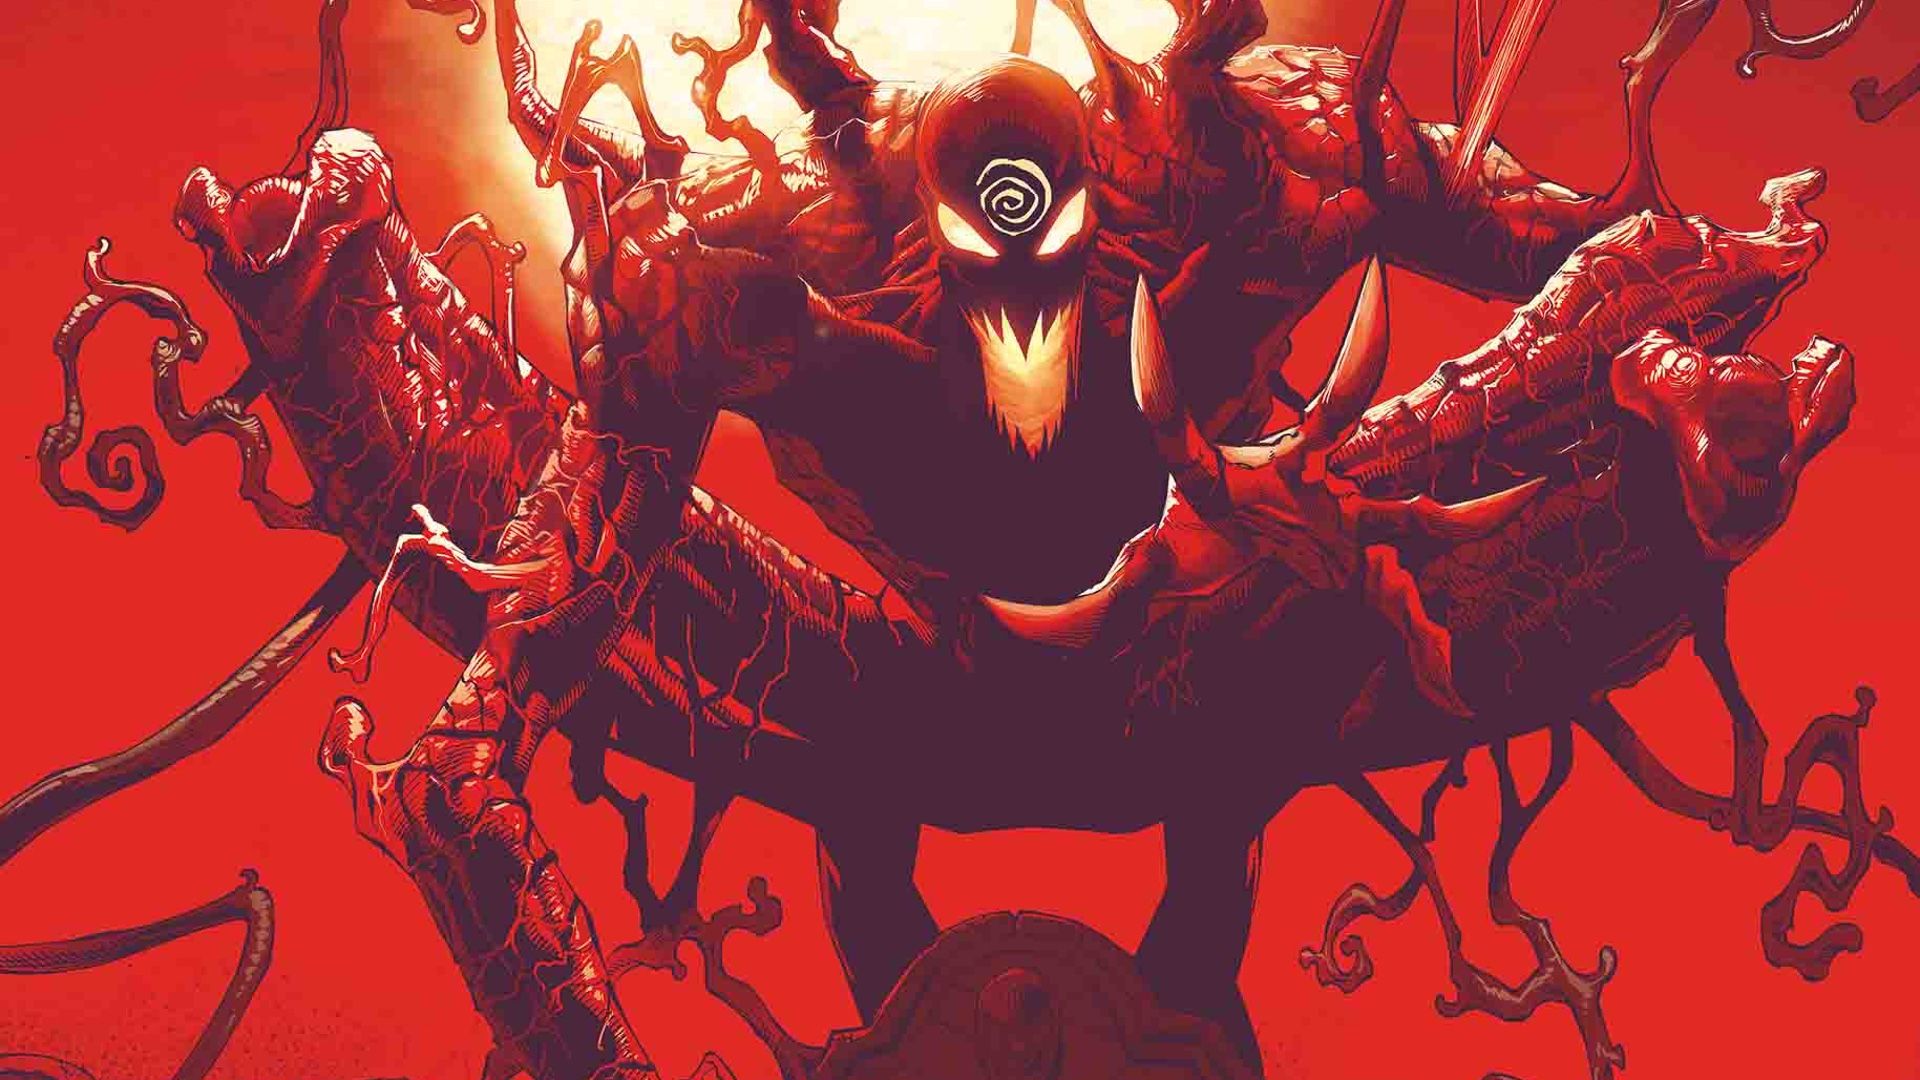 Marvel Comics Reveals The New Look For The Villain Carnage